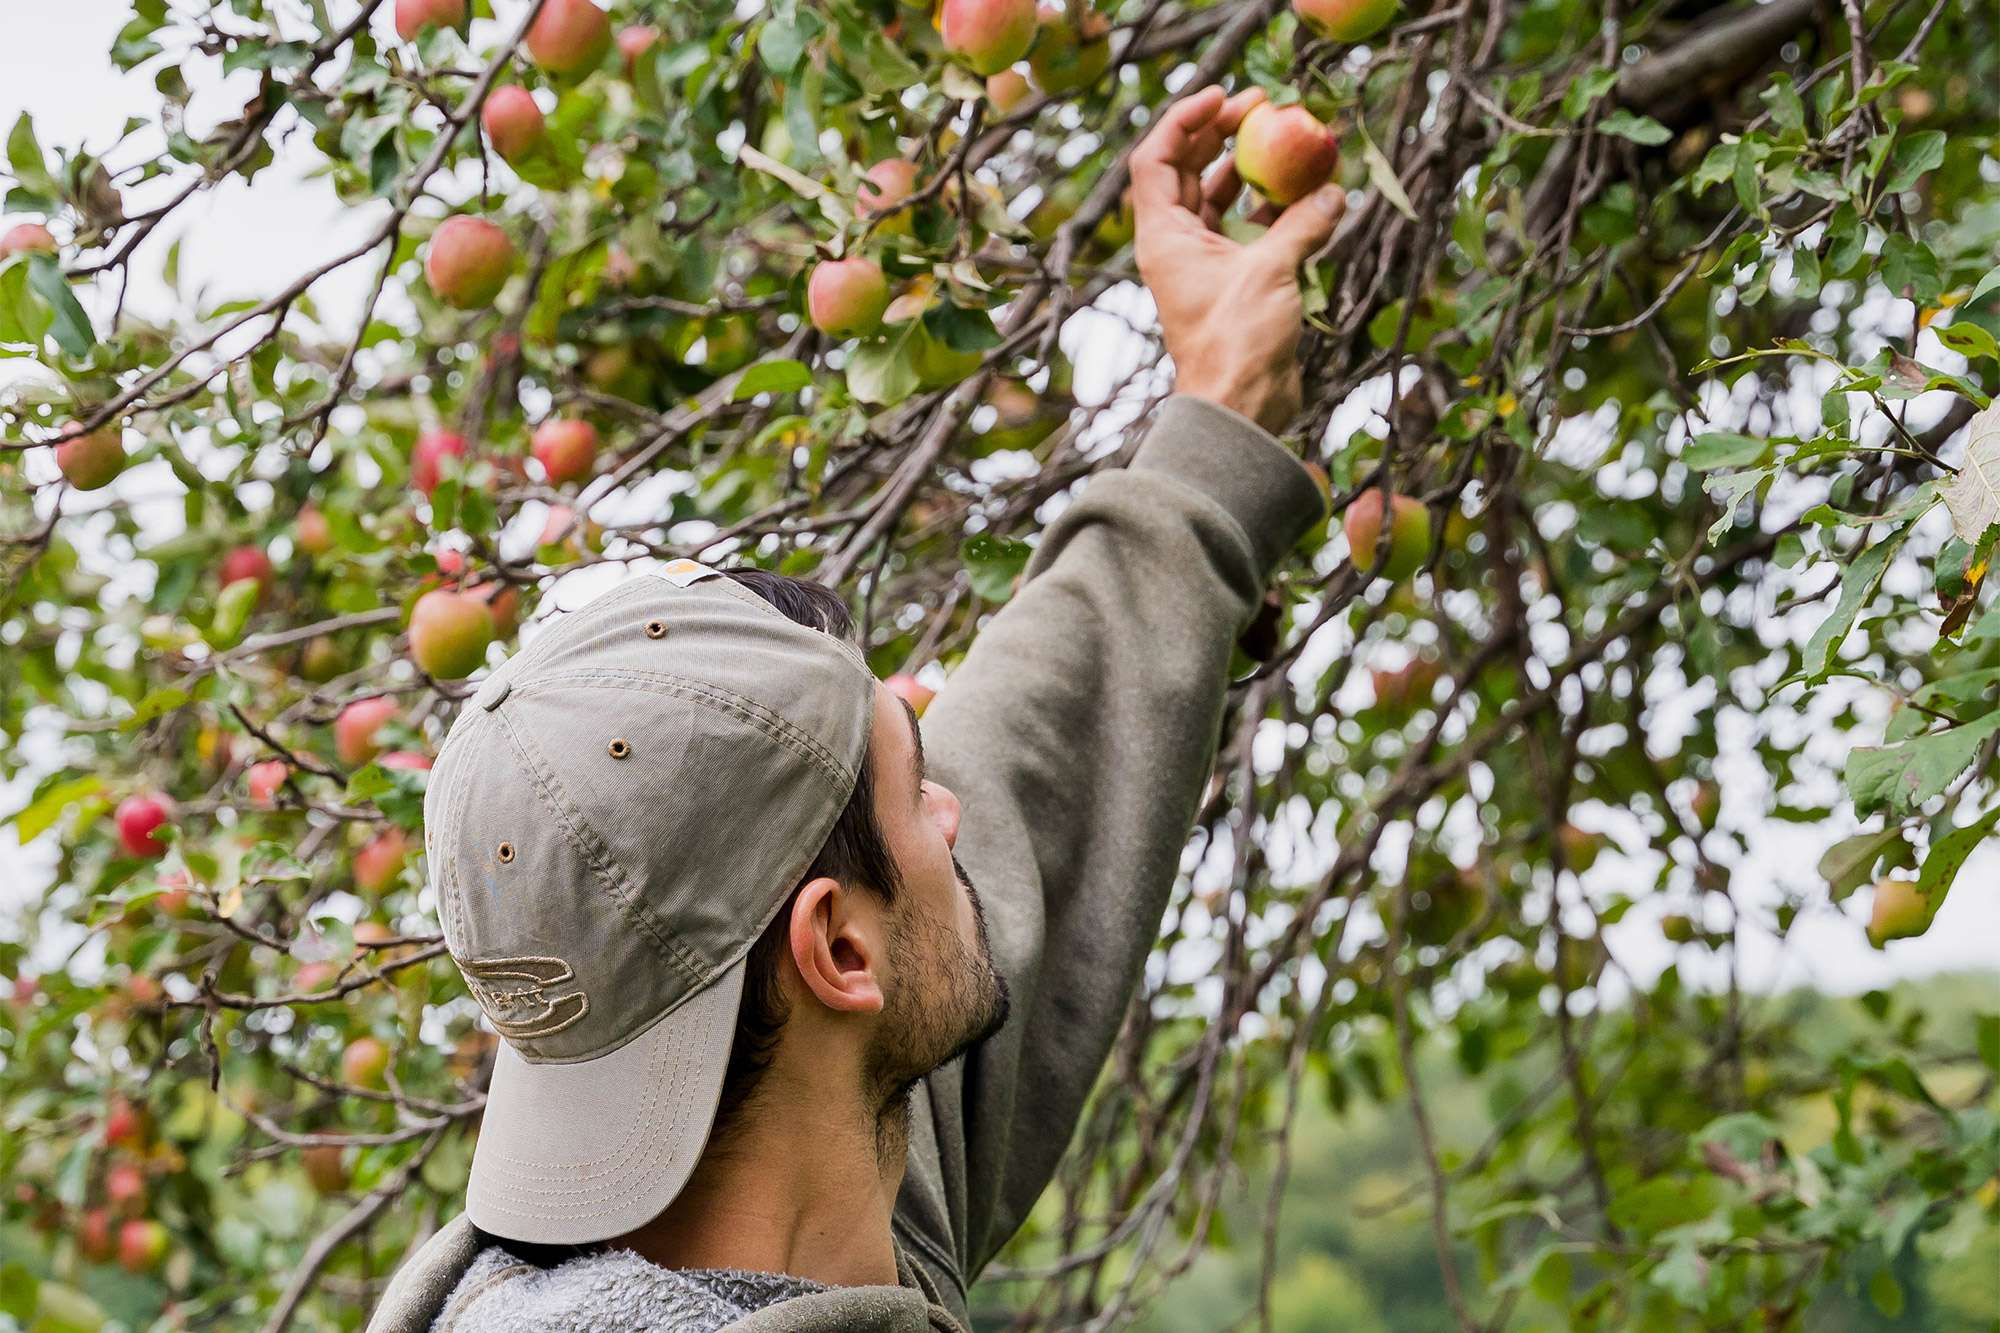 A young man is reaching up with his left hand to pluck a ripe apple off of an apple tree.